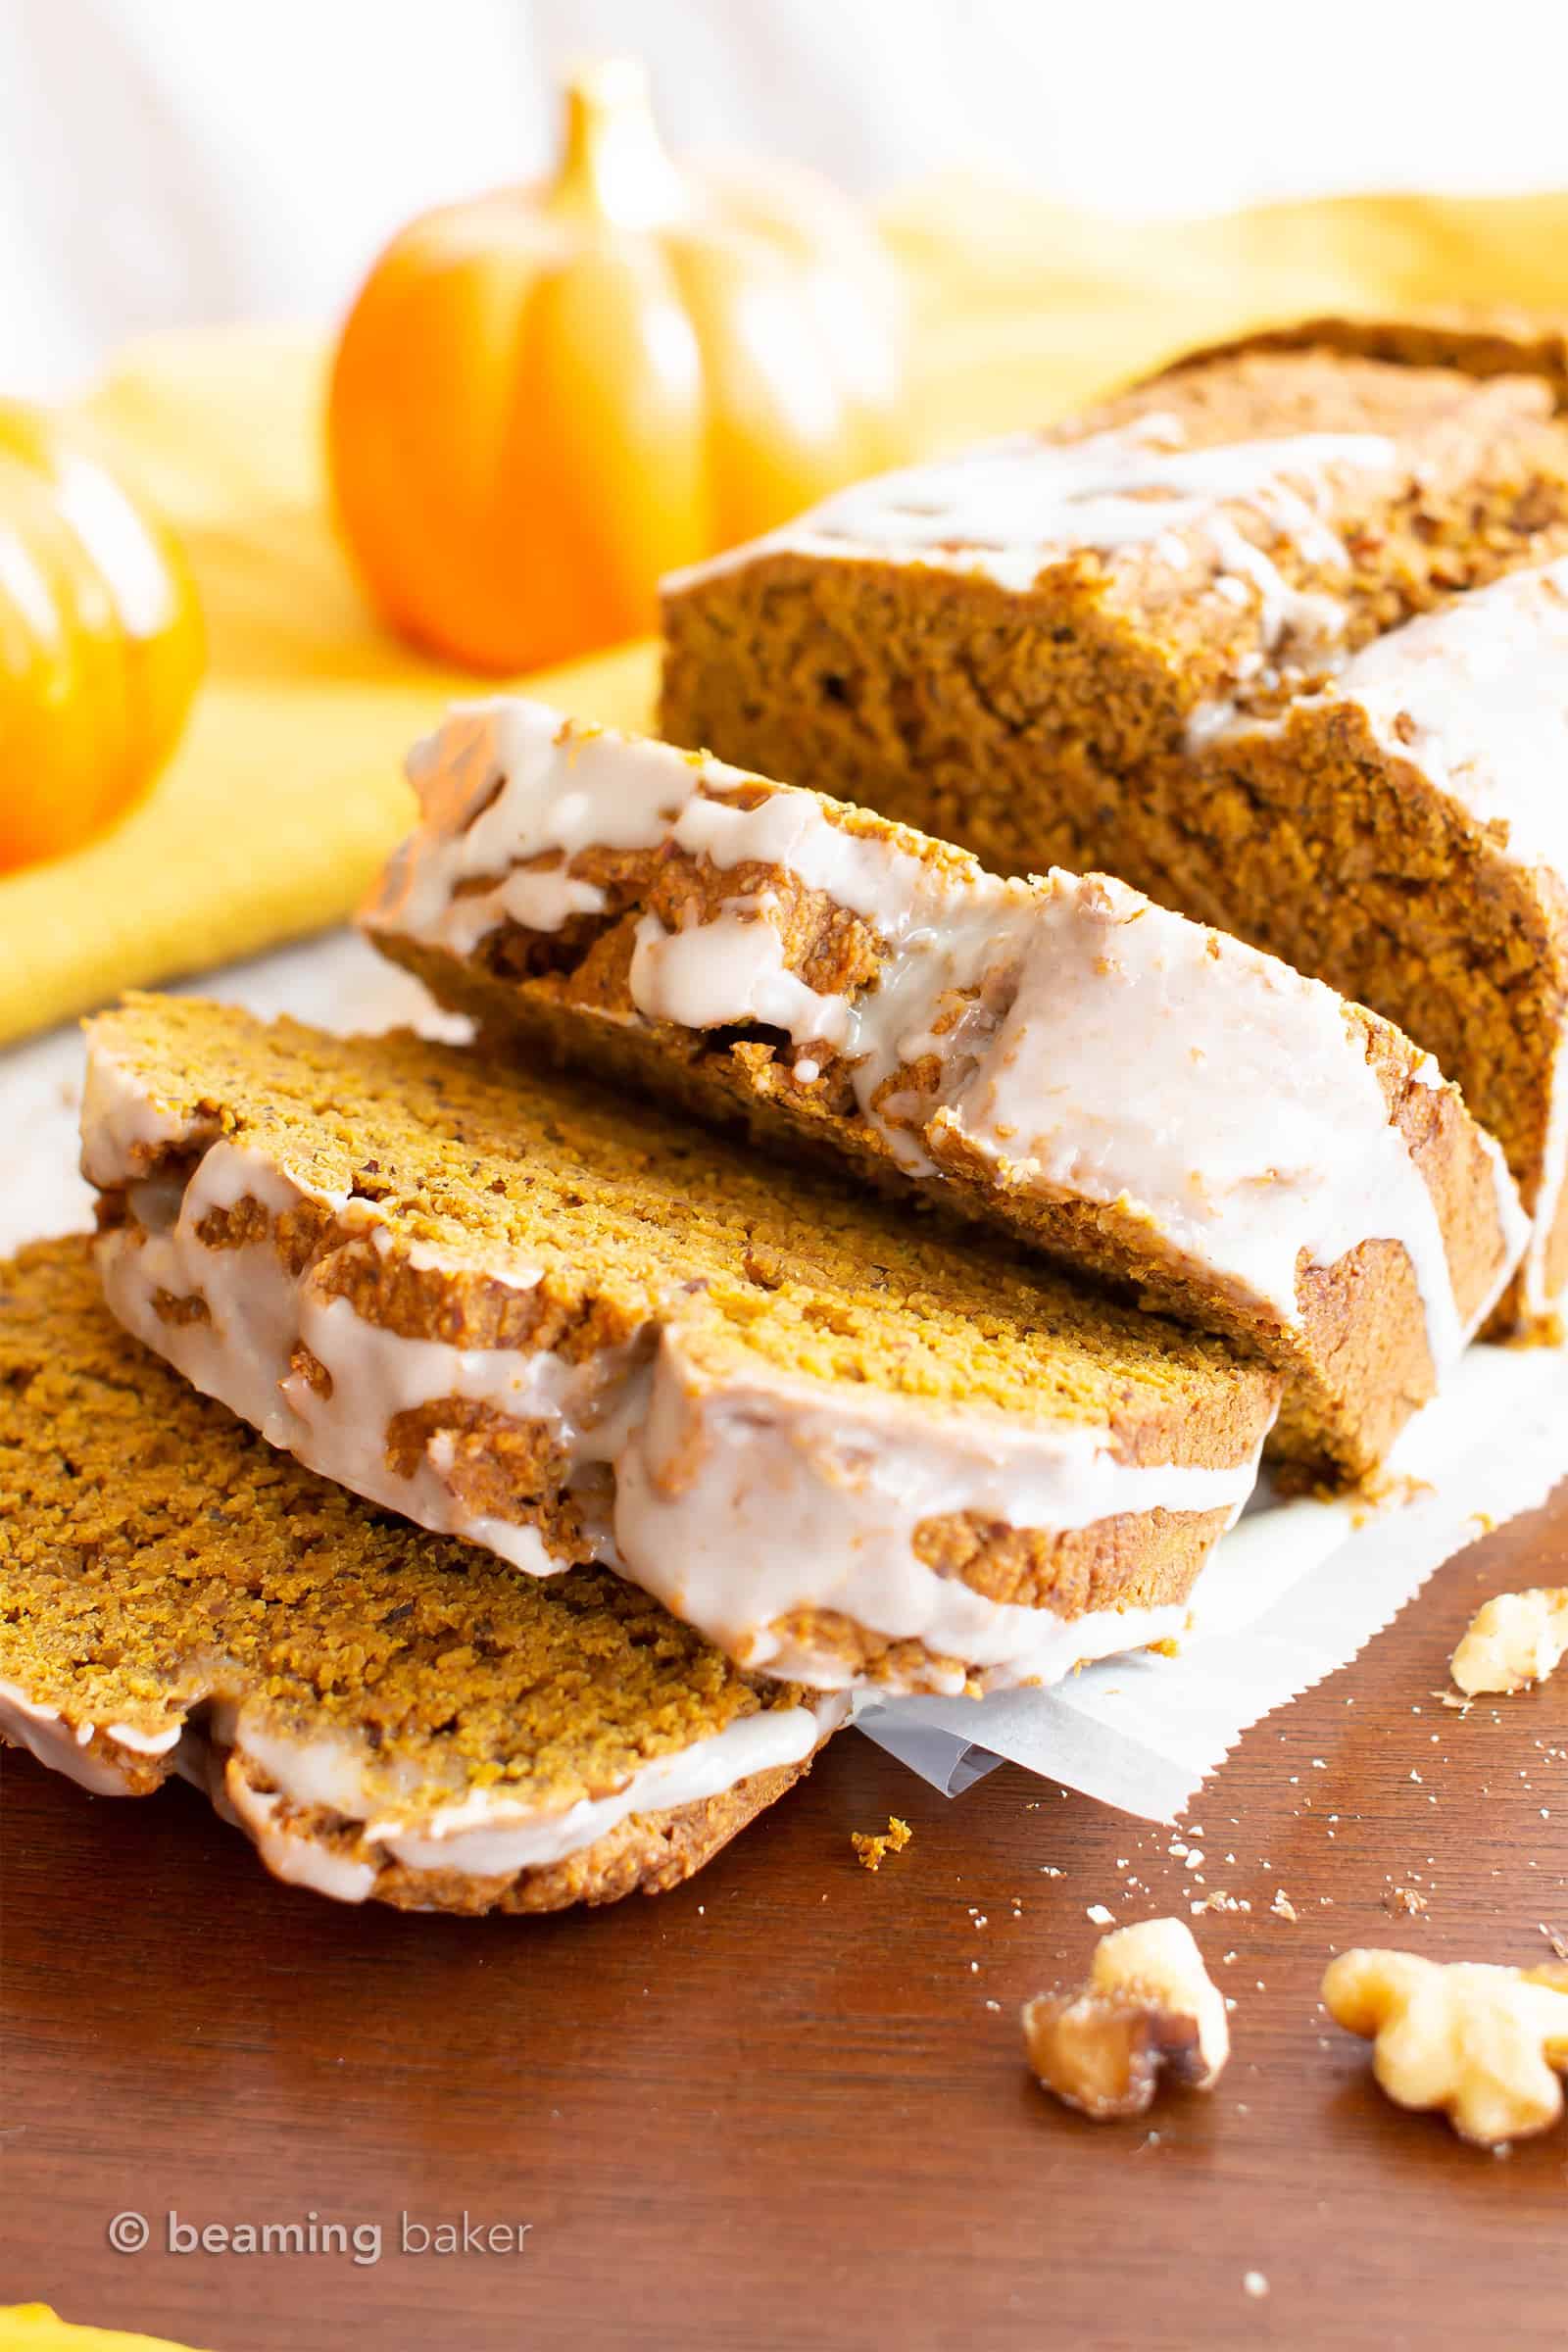 Glazed Vegan Gluten Free Pumpkin Bread Recipe (GF): easy & moist pumpkin bread made in just 1 bowl! The BEST vegan pumpkin bread recipe—flavorful, full of warm spices, made with healthy ingredients and topped with a sweet glaze. #Vegan #Pumpkin #GlutenFree #Bread | Recipe at BeamingBaker.com